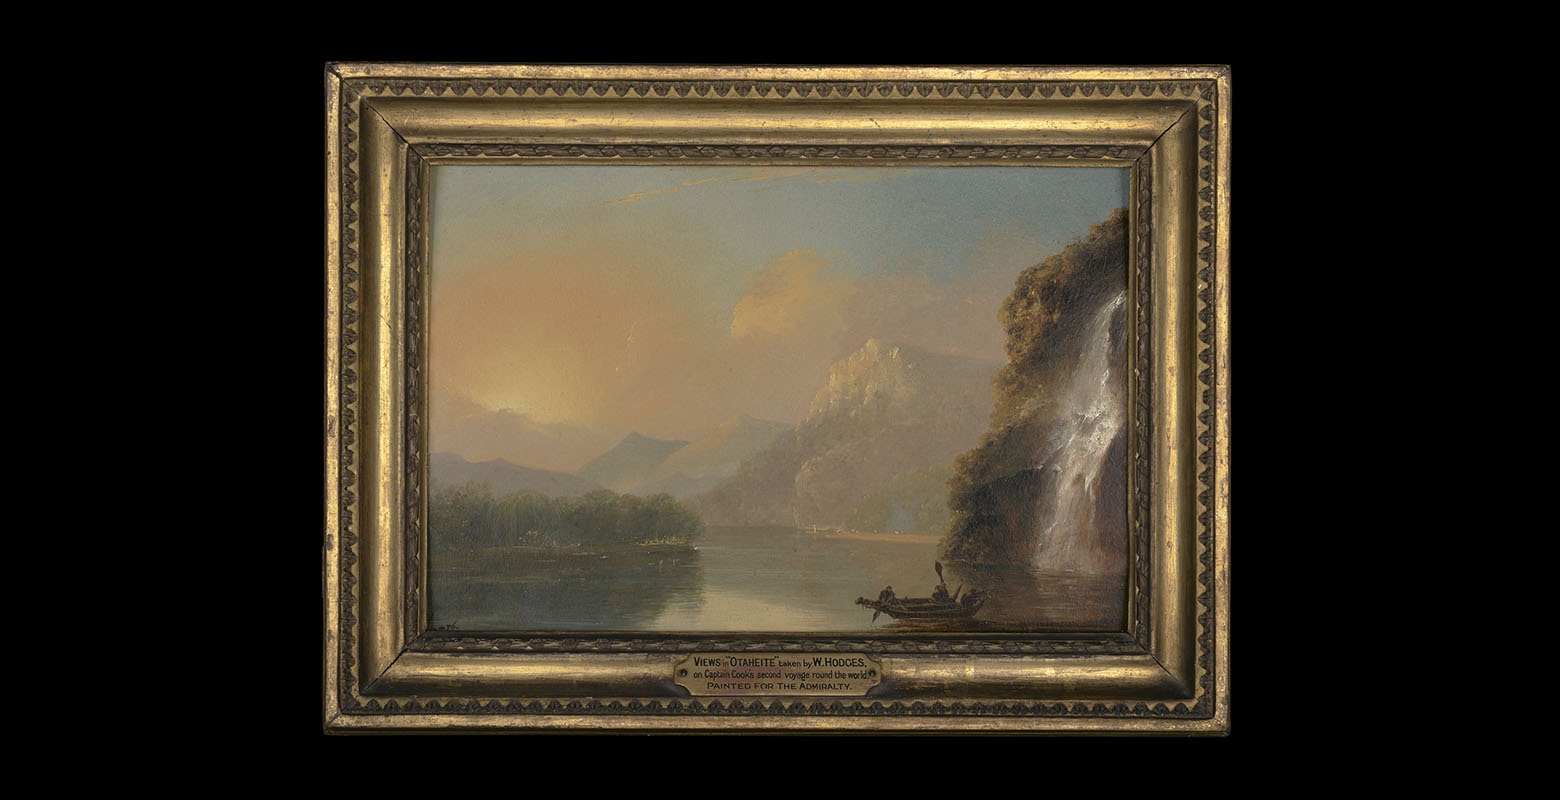 Painting of Dusky Sound | Tamatea. It depicts a body of water, a waterfall flowing from out of frame on the right, and a sun setting behind the mountains on the right. A canoe with people in it is on the water in the foreground